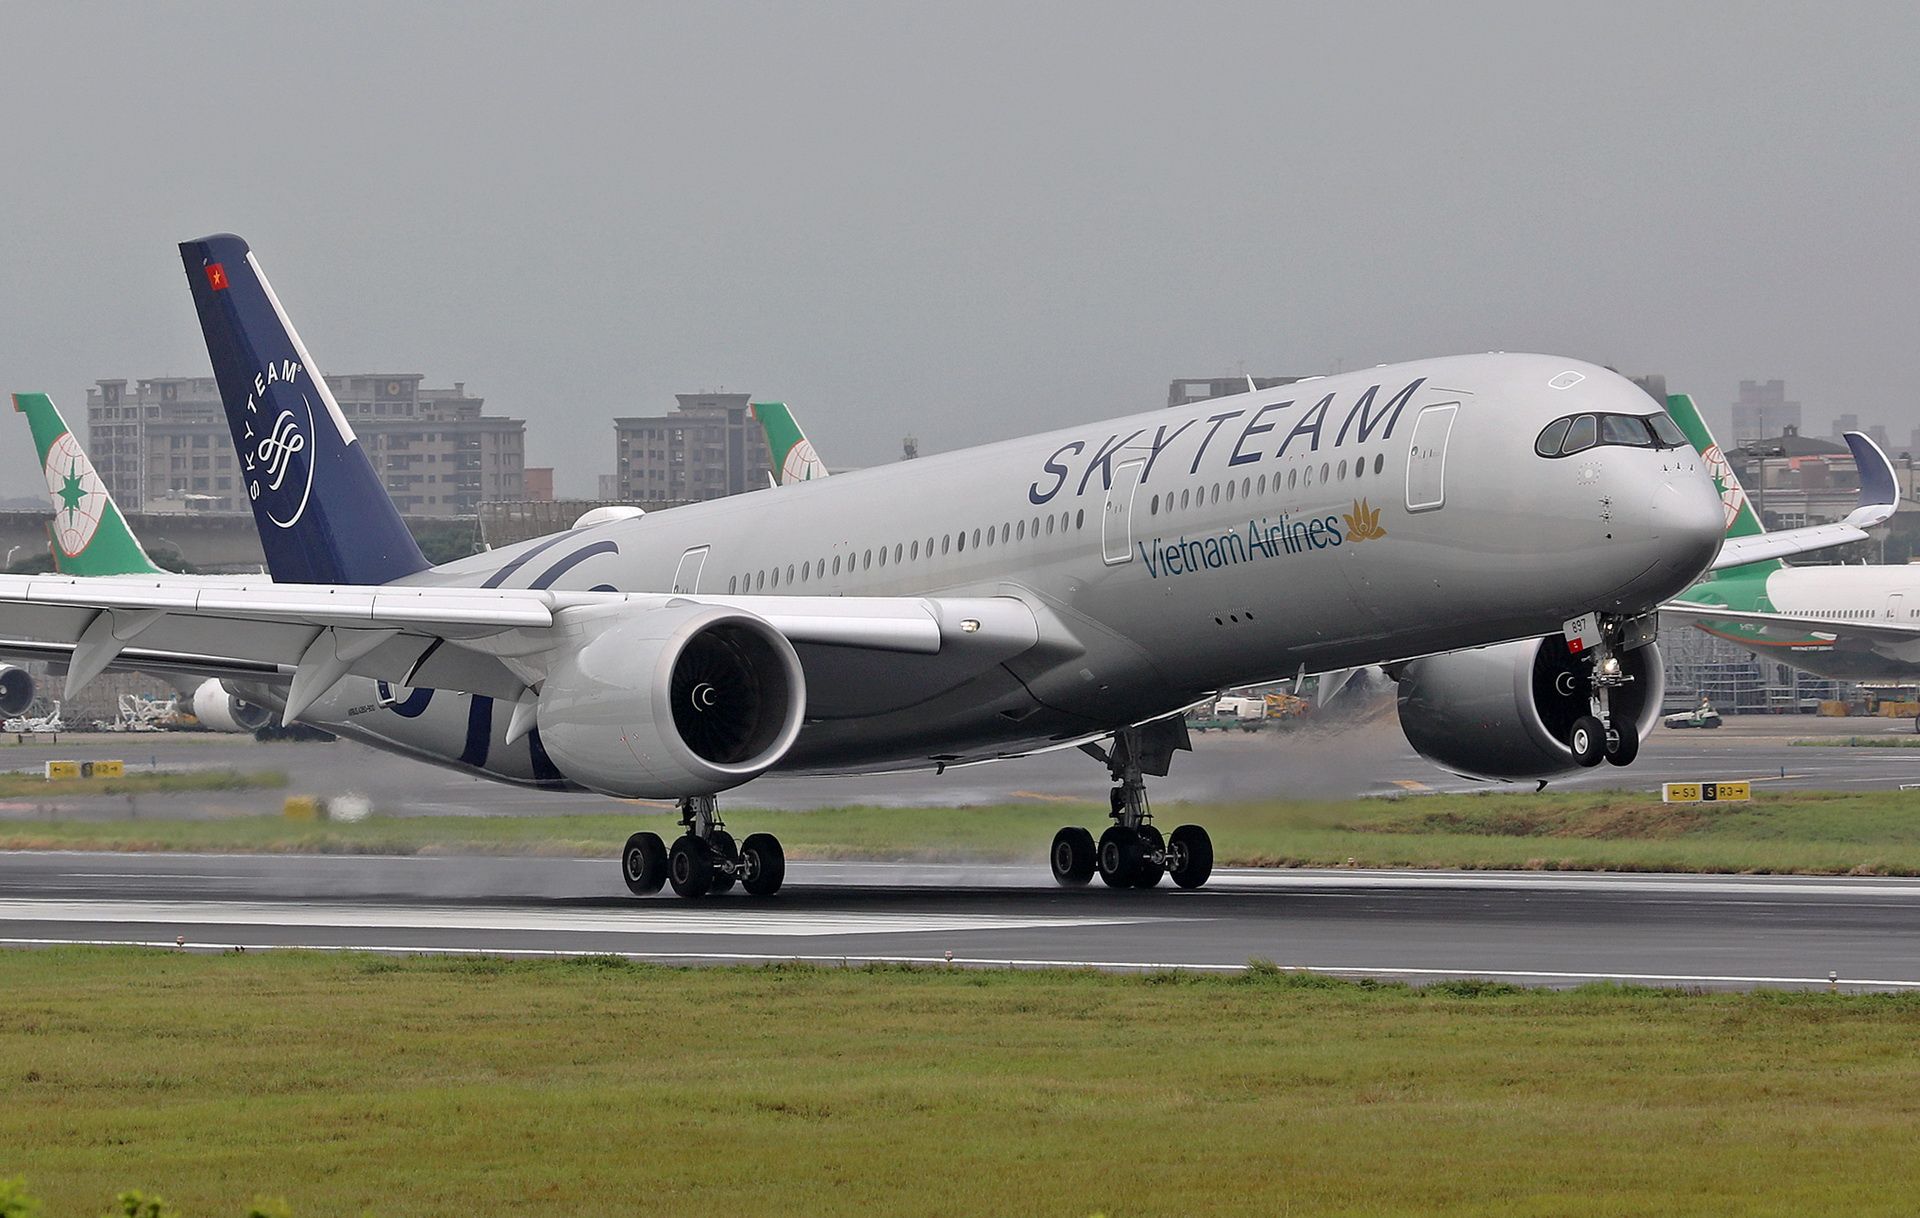 Alliance shocker: SAS to tie up with Air France-KLM and SkyTeam, ditch Star  Alliance - The Points Guy